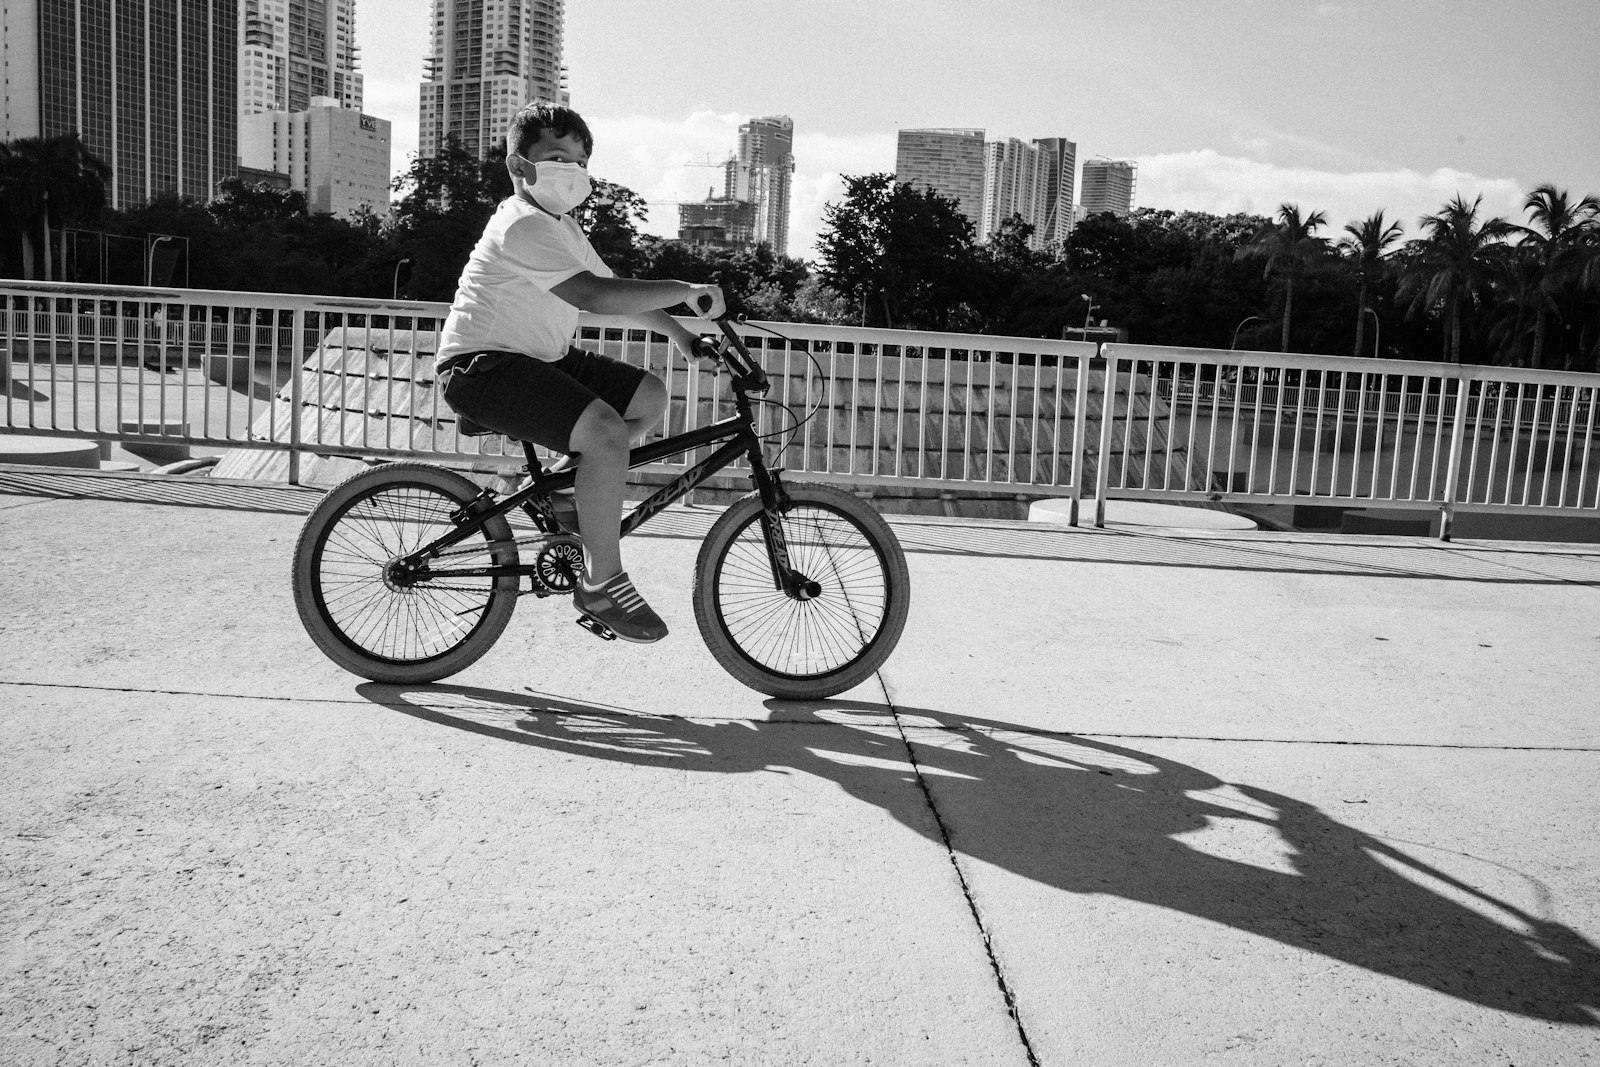 Leica M10 sample photo. Man riding on bicycle photography